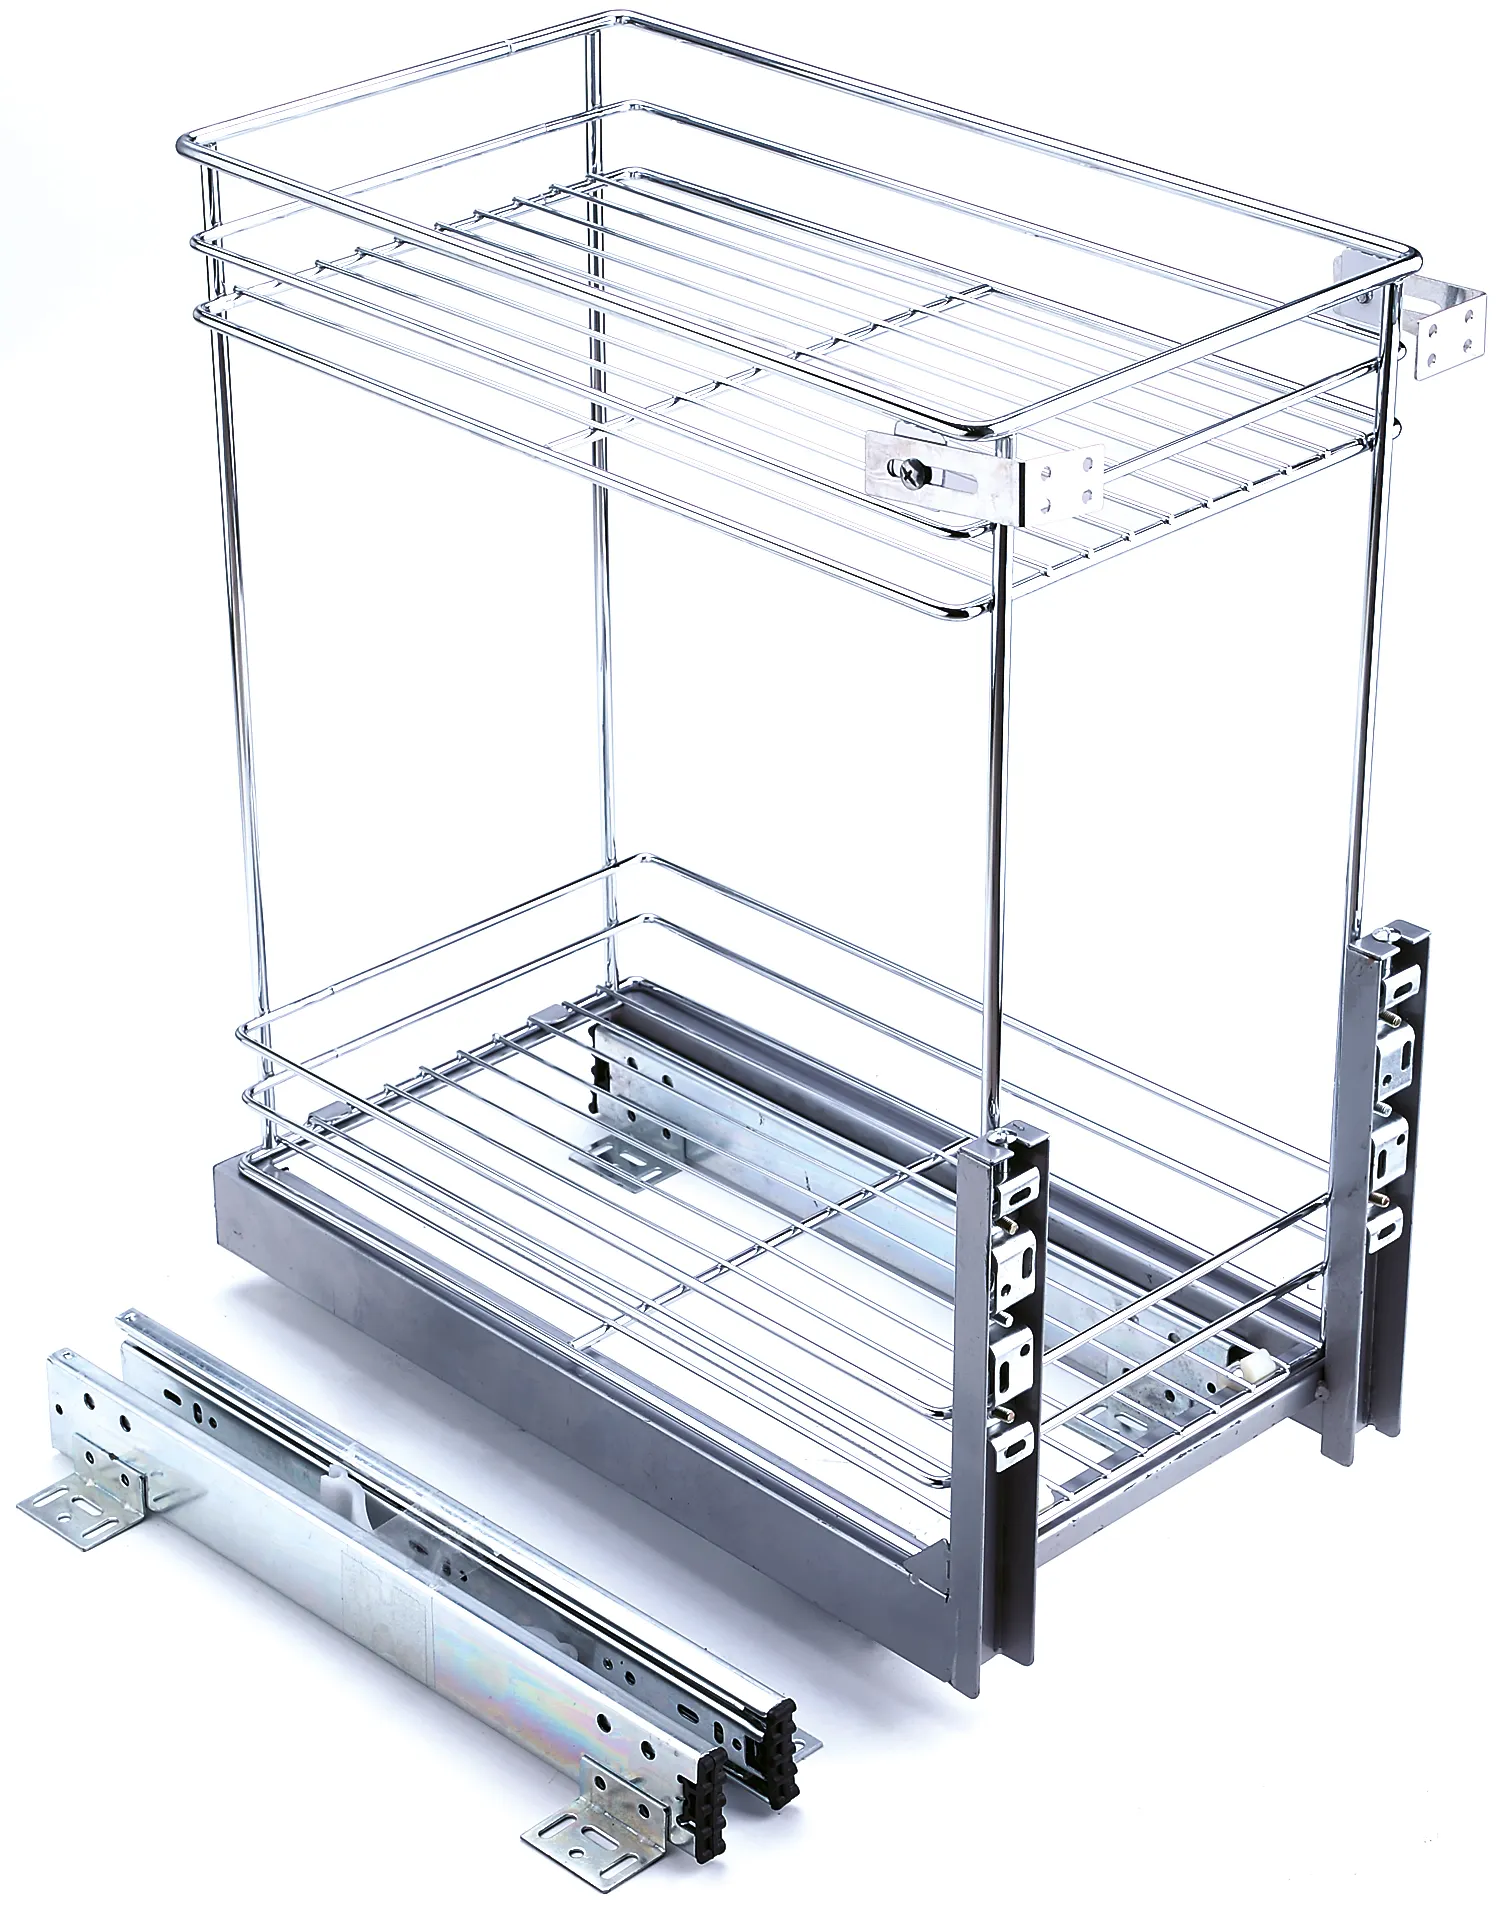 Chrome Wire Basket Stainless Steel Kitchen Chrome Plated Wire Sliding Basket